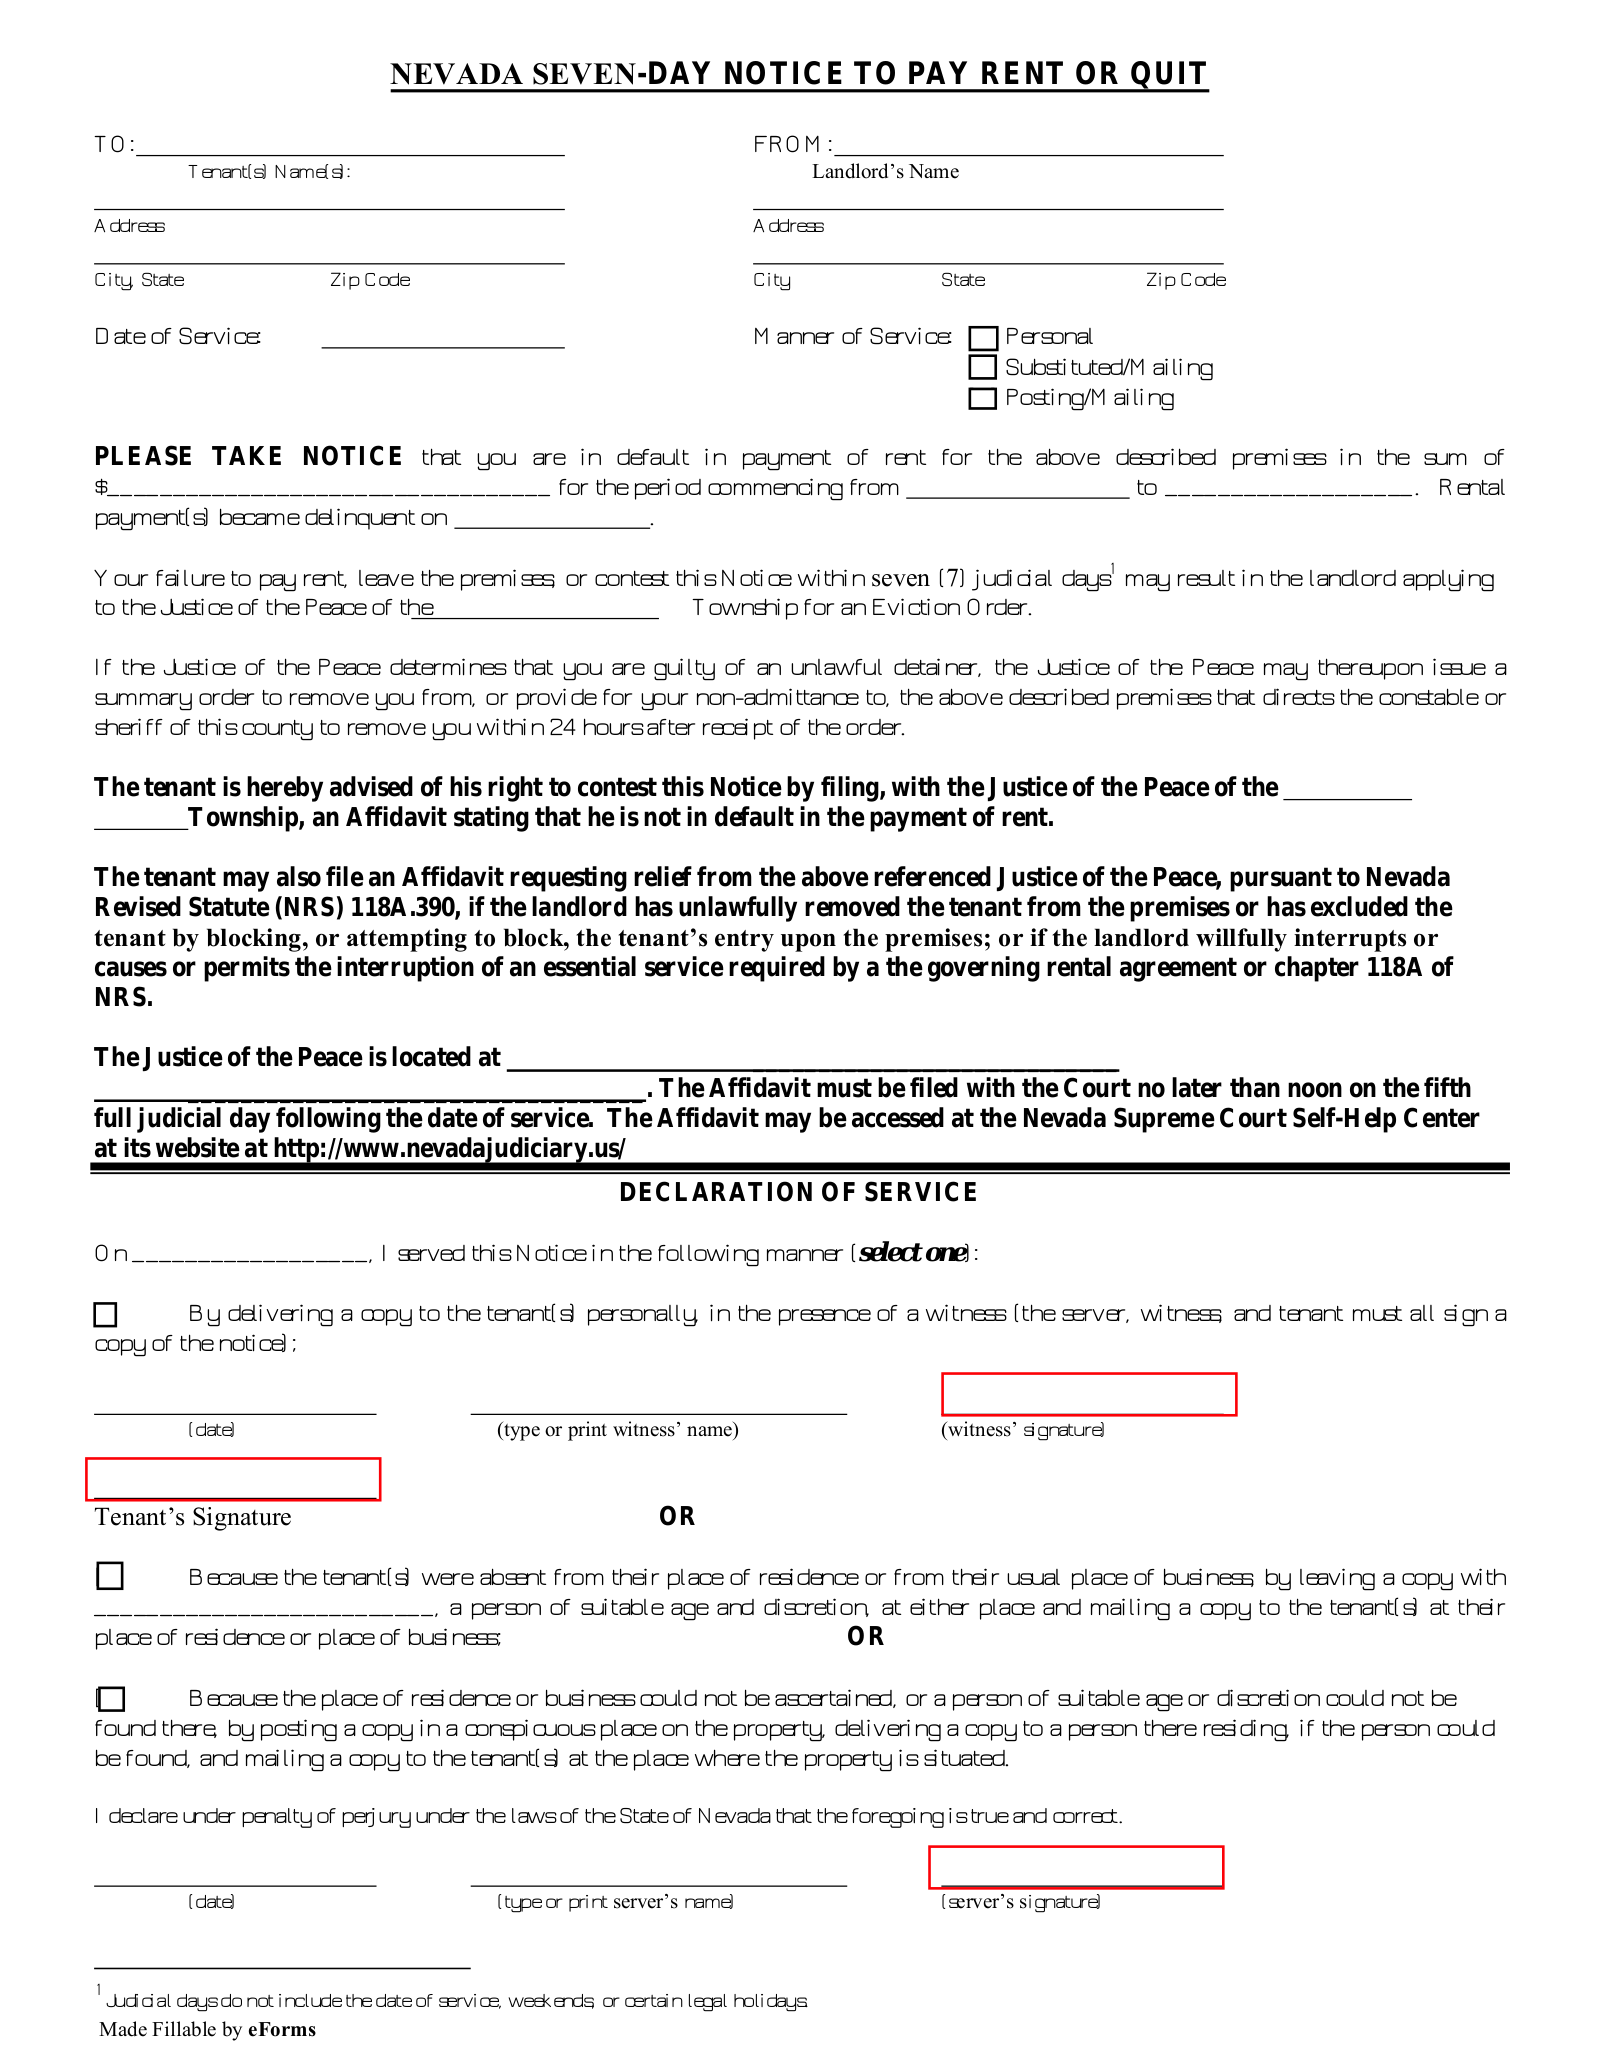 Nevada 7-Day Notice to Quit Form | Non-Payment of Rent